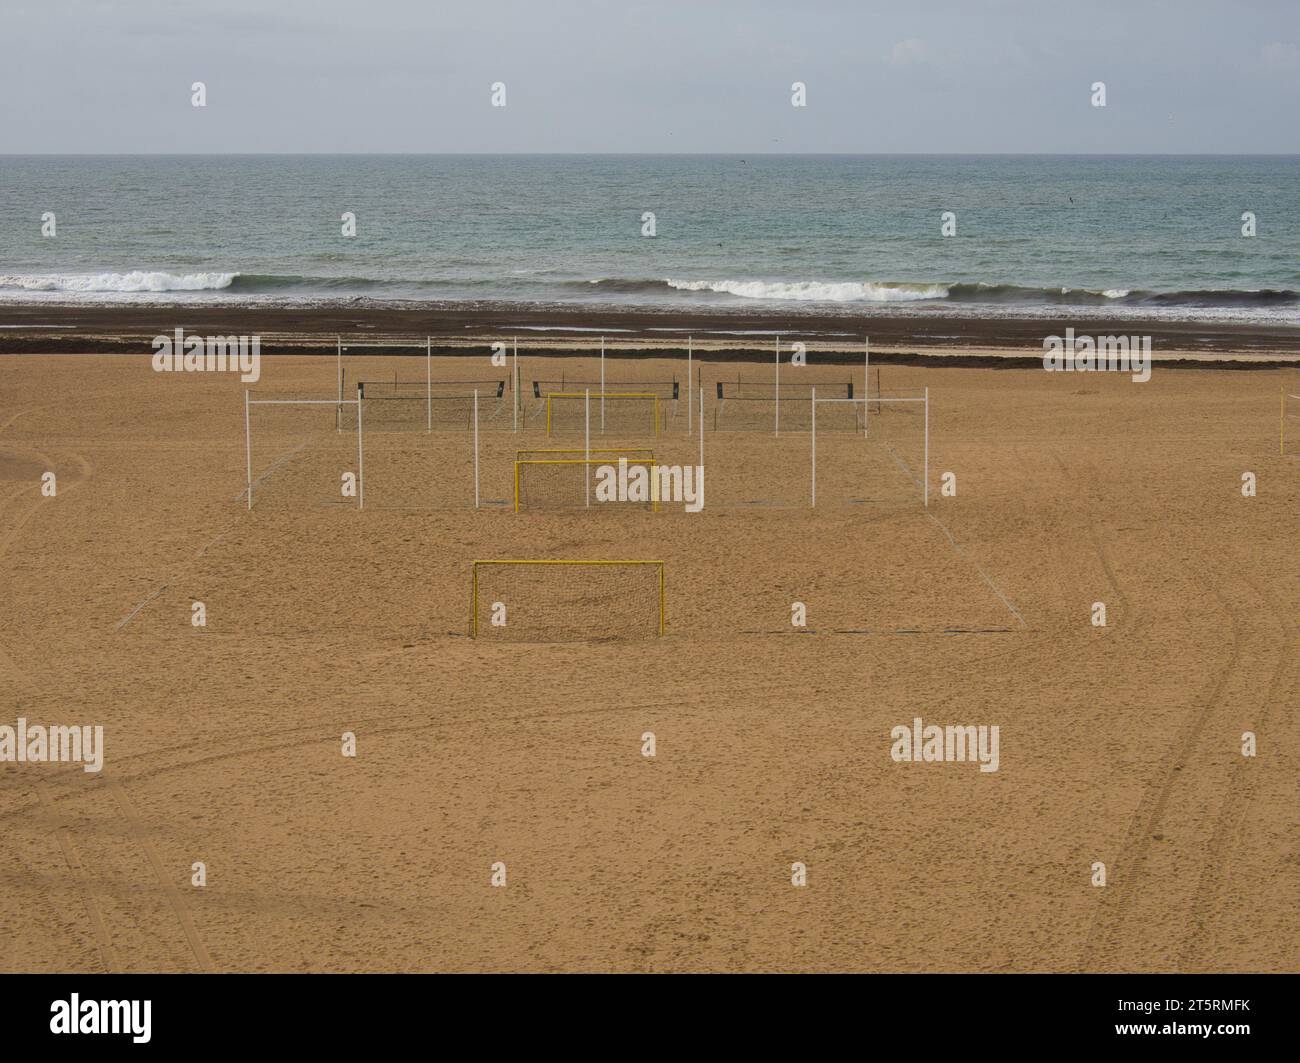 Deserted football and beach volleyball playing fields in the middle of the sandy beach with the sea in the background. Stock Photo